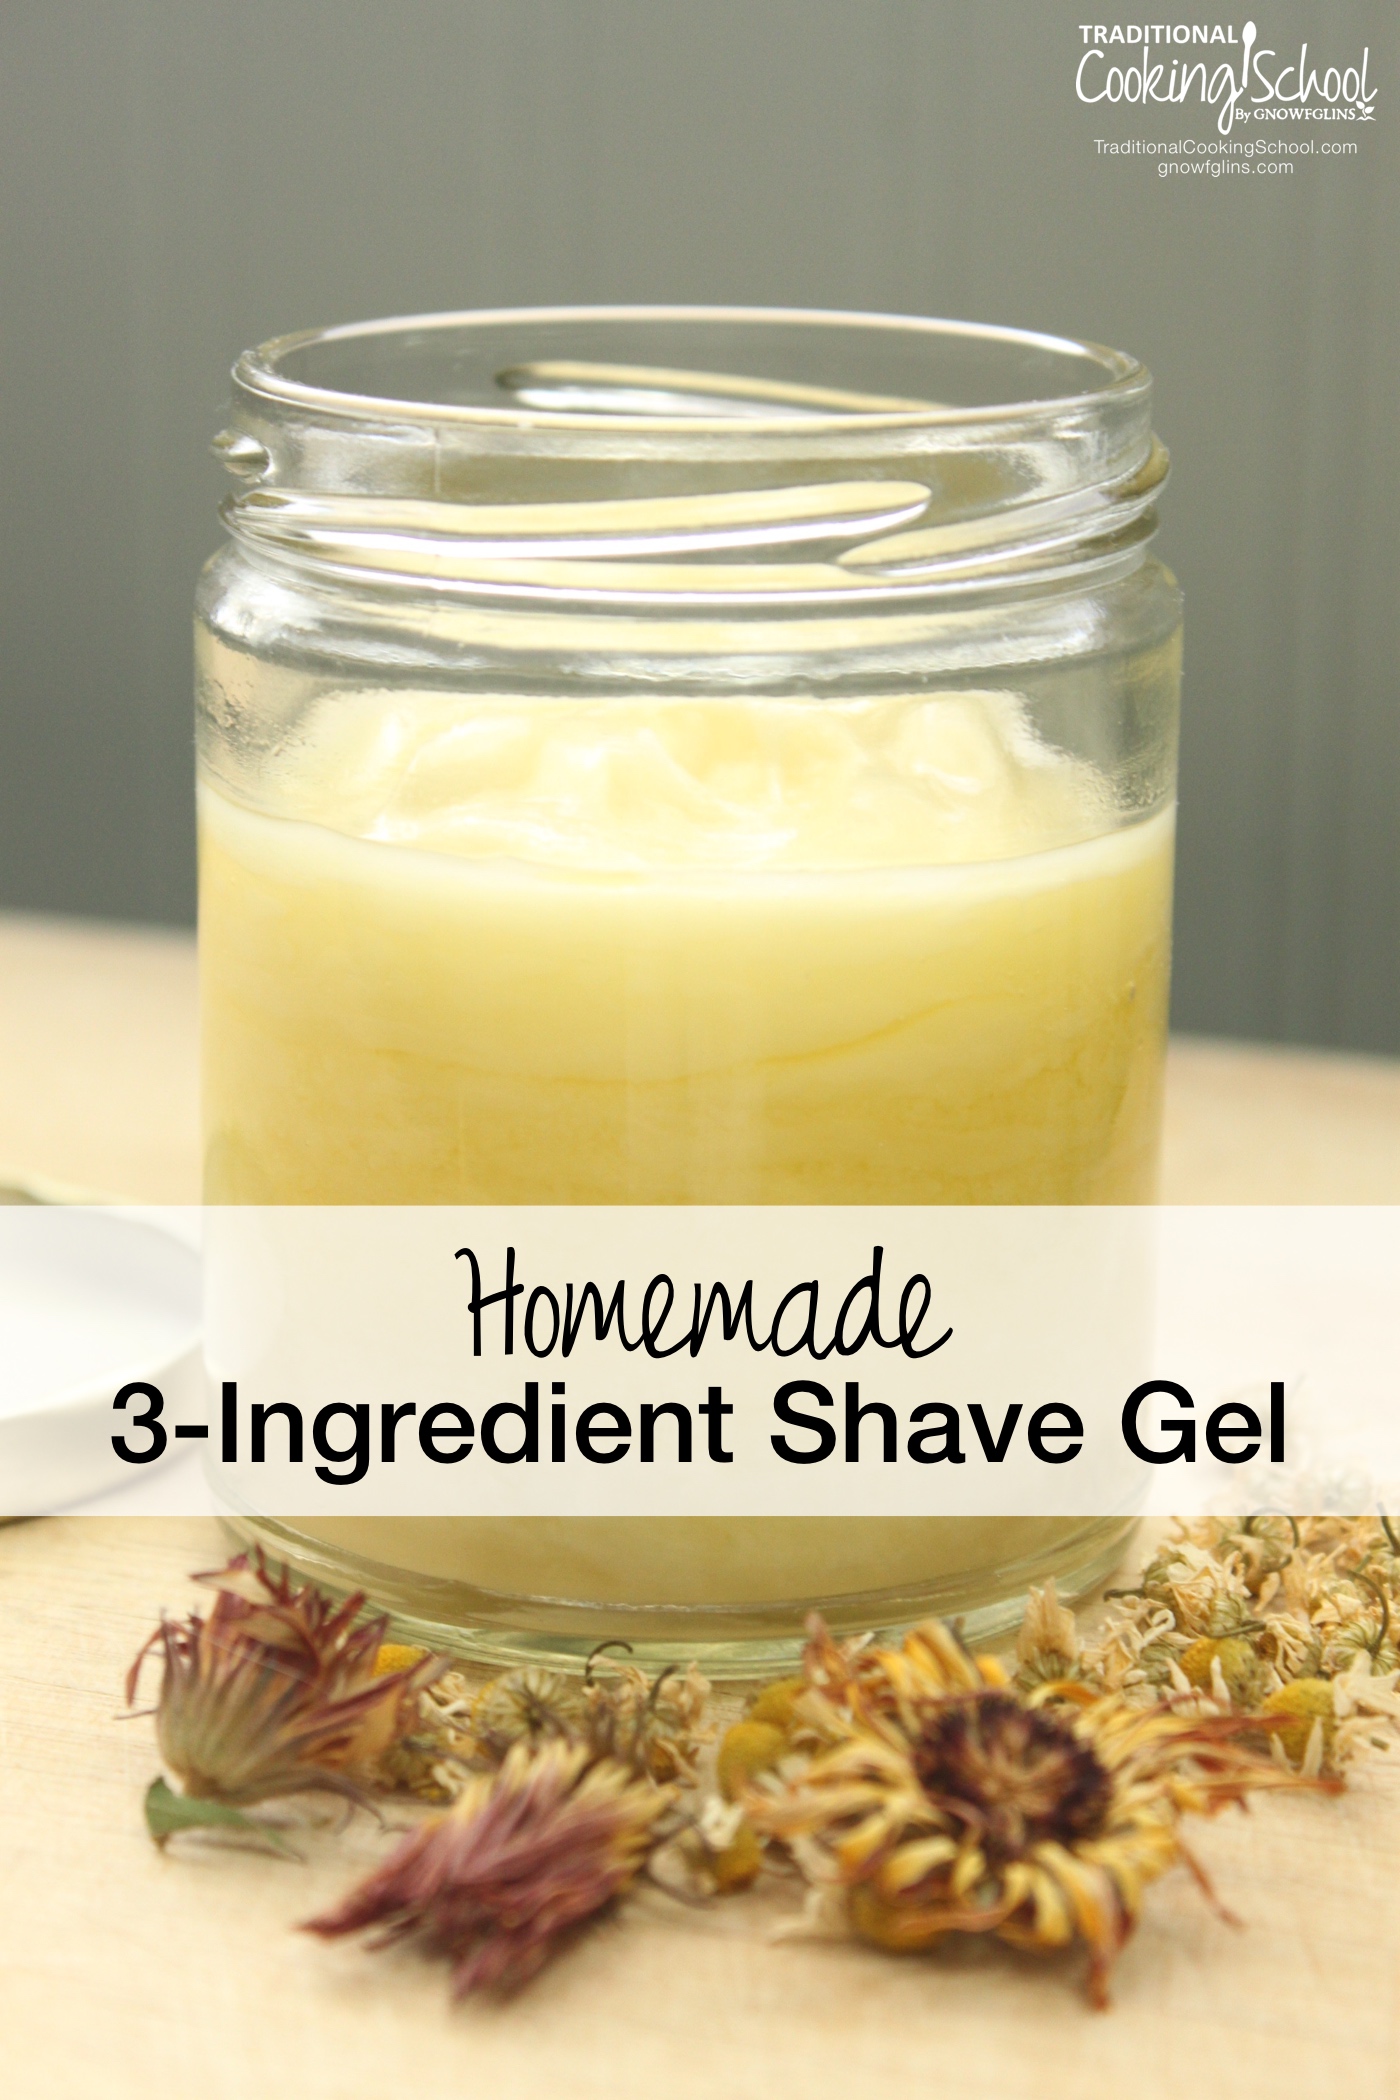 Homemade 3-Ingredient Shave Gel | Are you searching for a chemical-free, economical shave gel? One that leaves your skin feeling super soft and nourished? Look no further! This easy, homemade 3-ingredient gel uses healing herbs, soothing Aloe vera, and olive oil for a smooth shave that is kind to your skin. | TraditionalCookingSchool.com